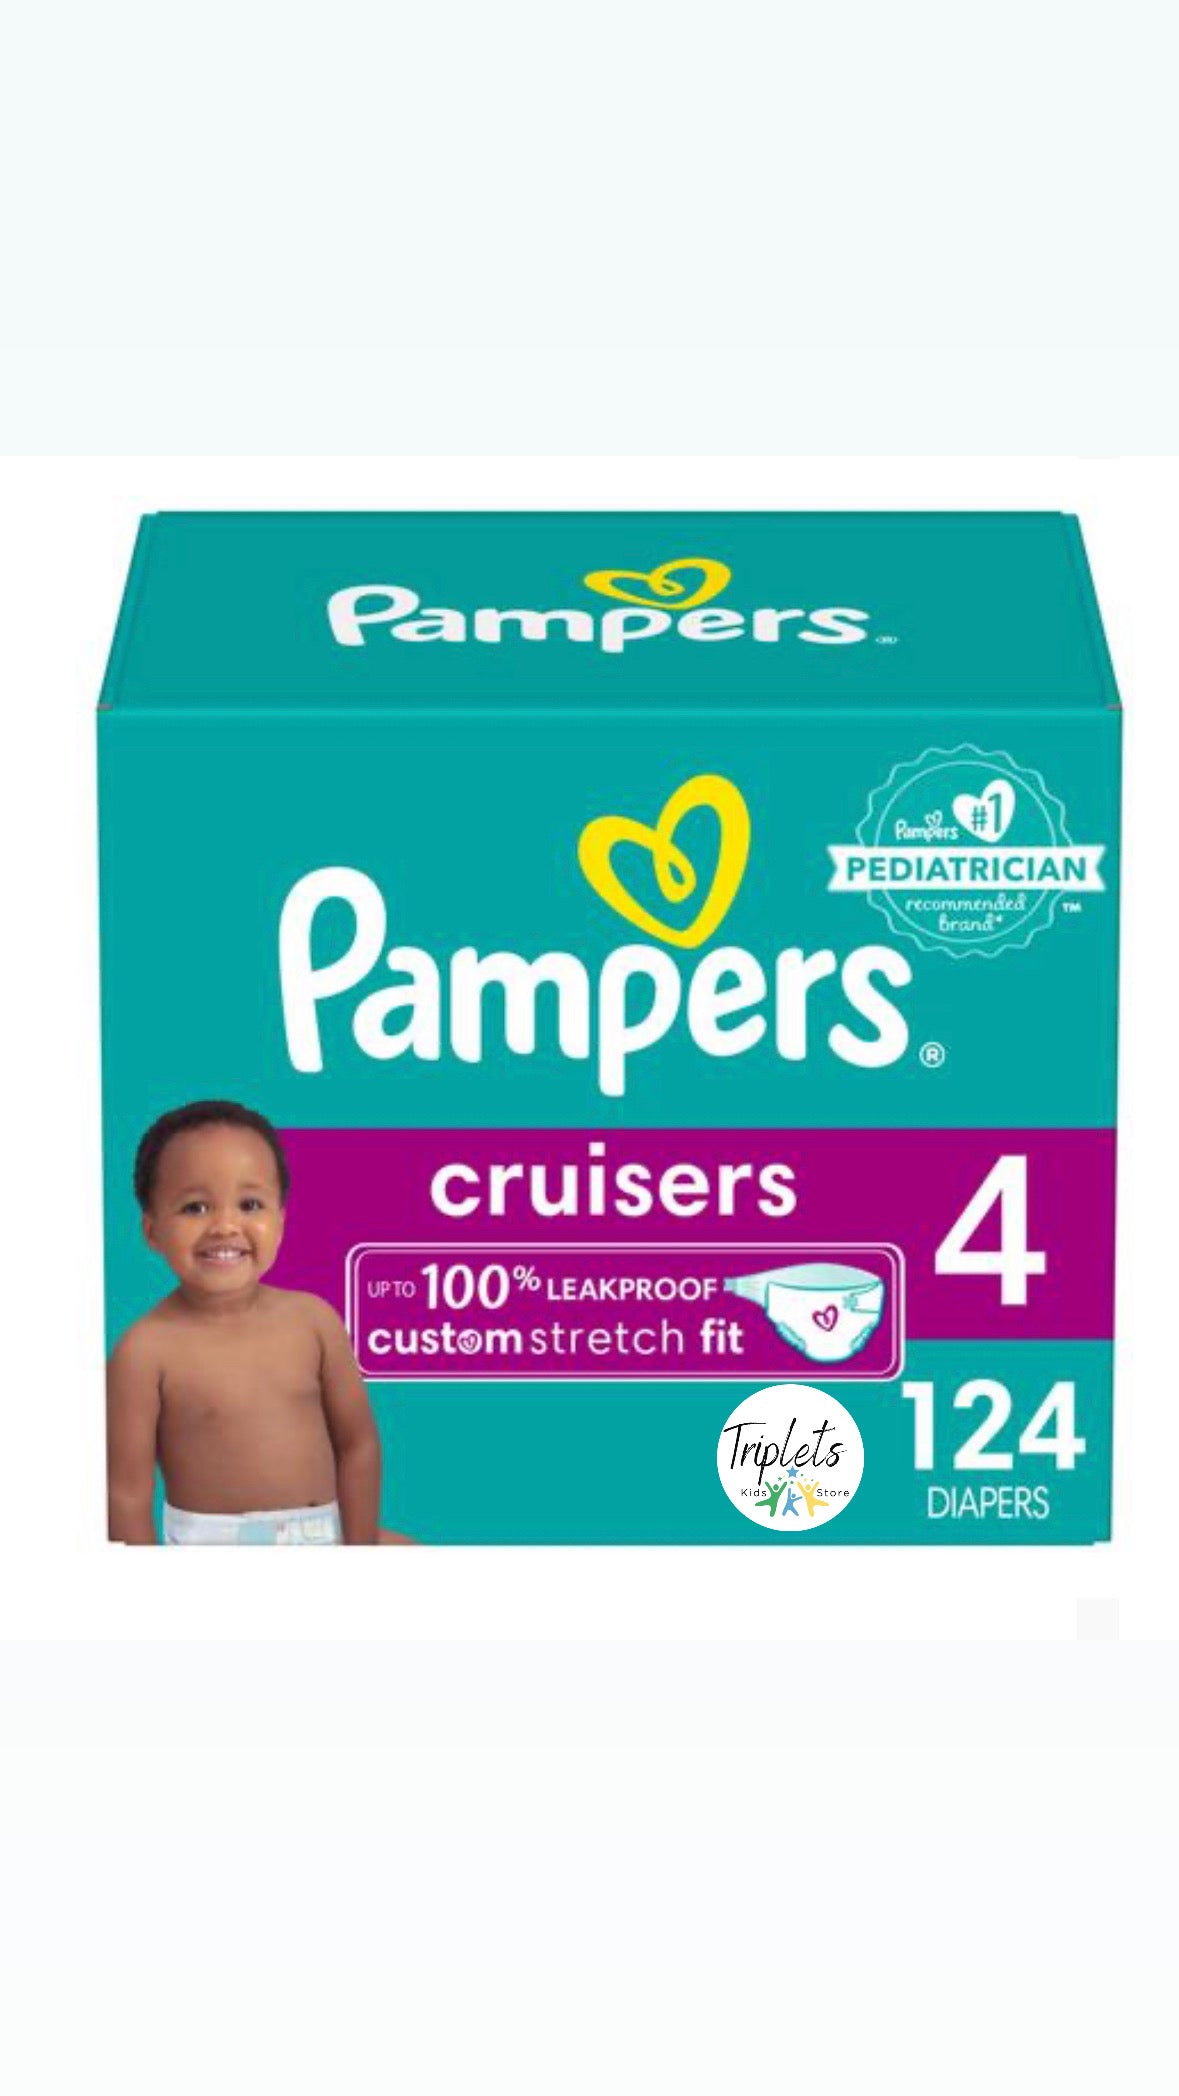 Pampers Pañales Cruisers Size 4